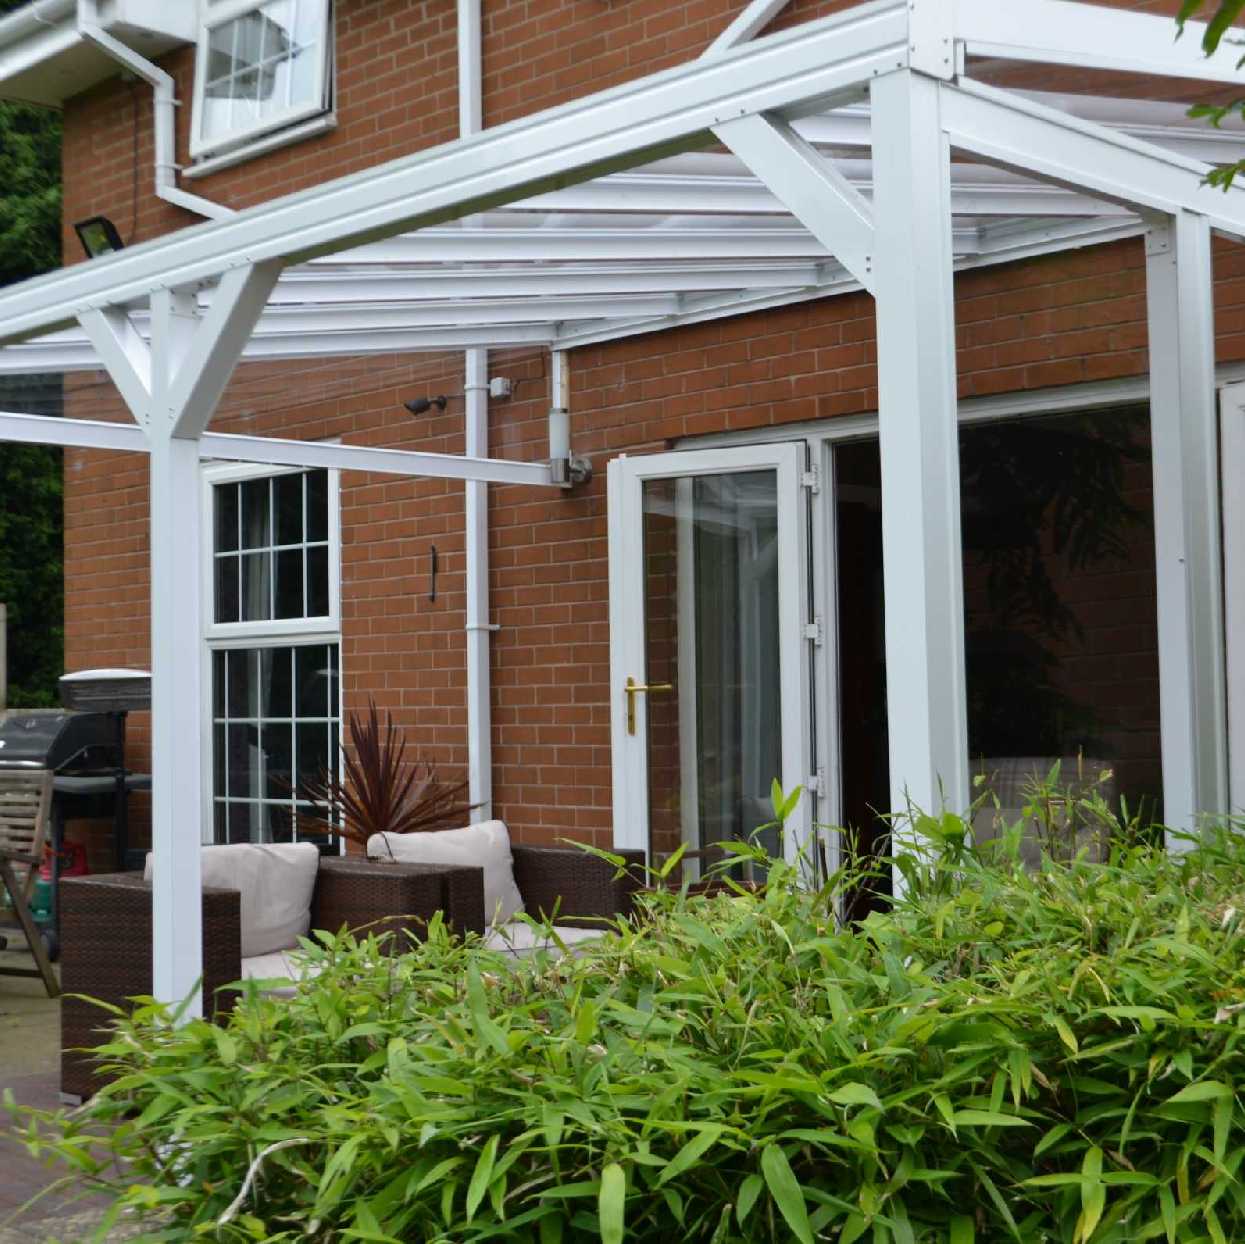 Omega Smart Lean-To Canopy, White with 6mm Glass Clear Plate Polycarbonate Glazing - 5.6m (W) x 1.5m (P), (3) Supporting Posts from Omega Build